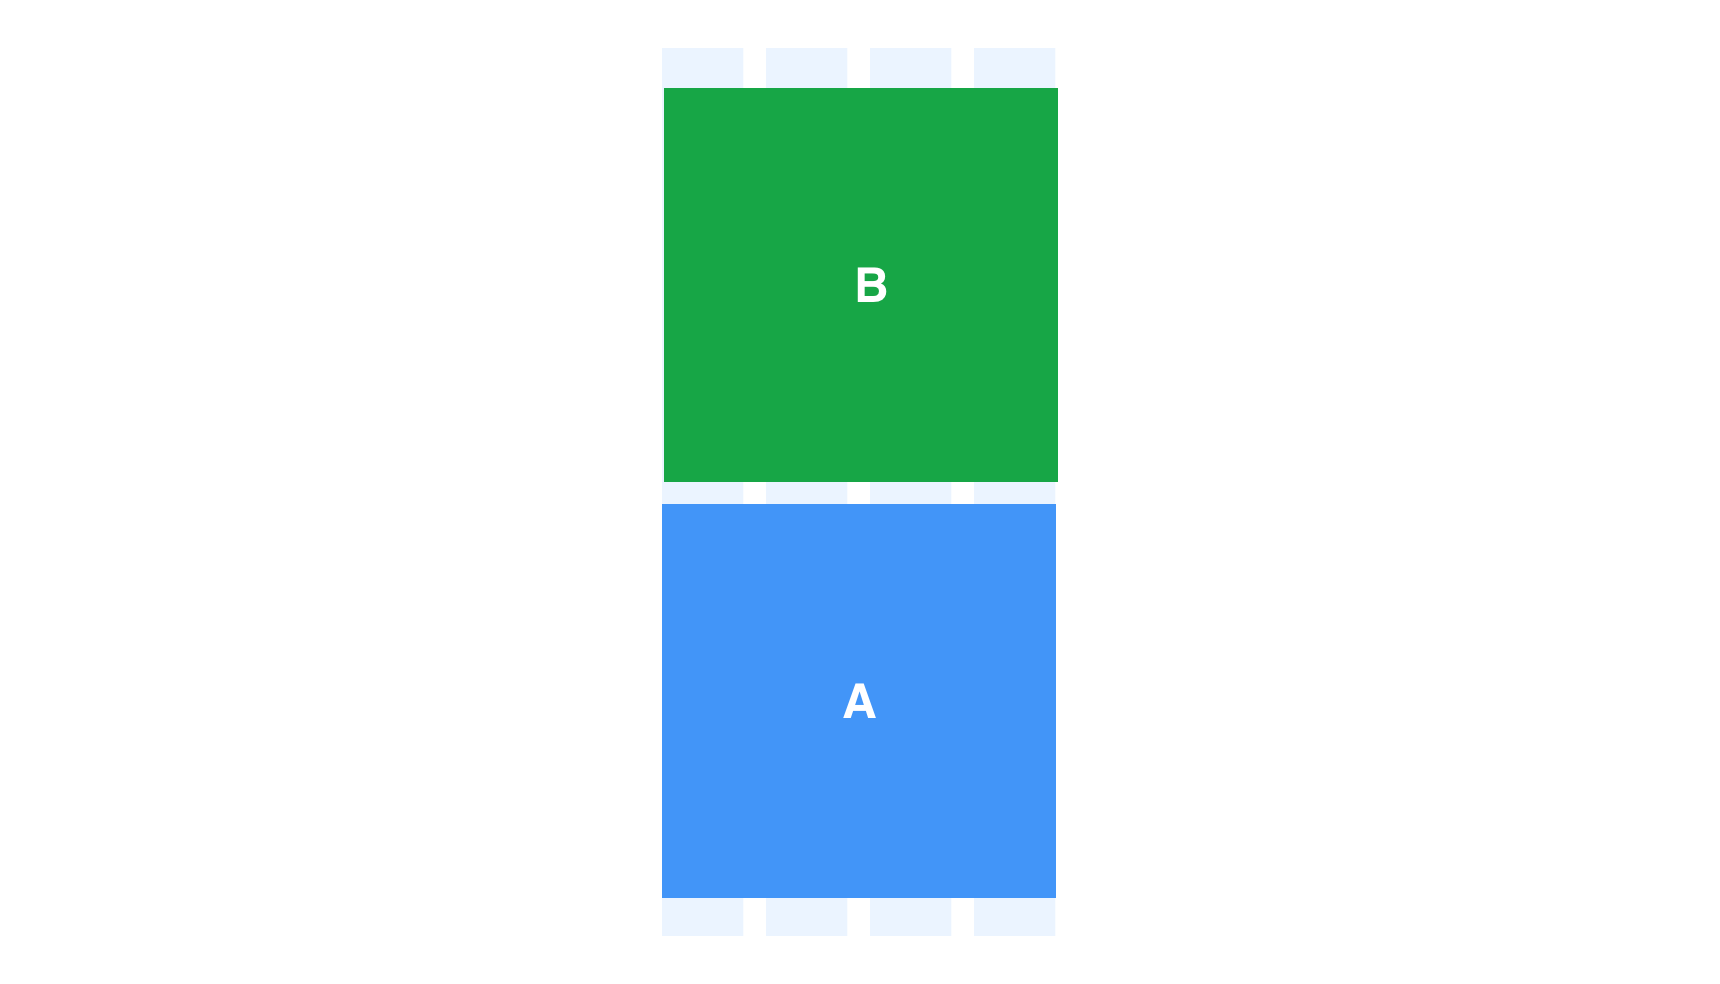 Two blocks (B, A) spanning 4 columns each, on a 4 column grid, stacked on top of each other in the wrong reflow order. Block B is incorrectly stacked on top of block A.